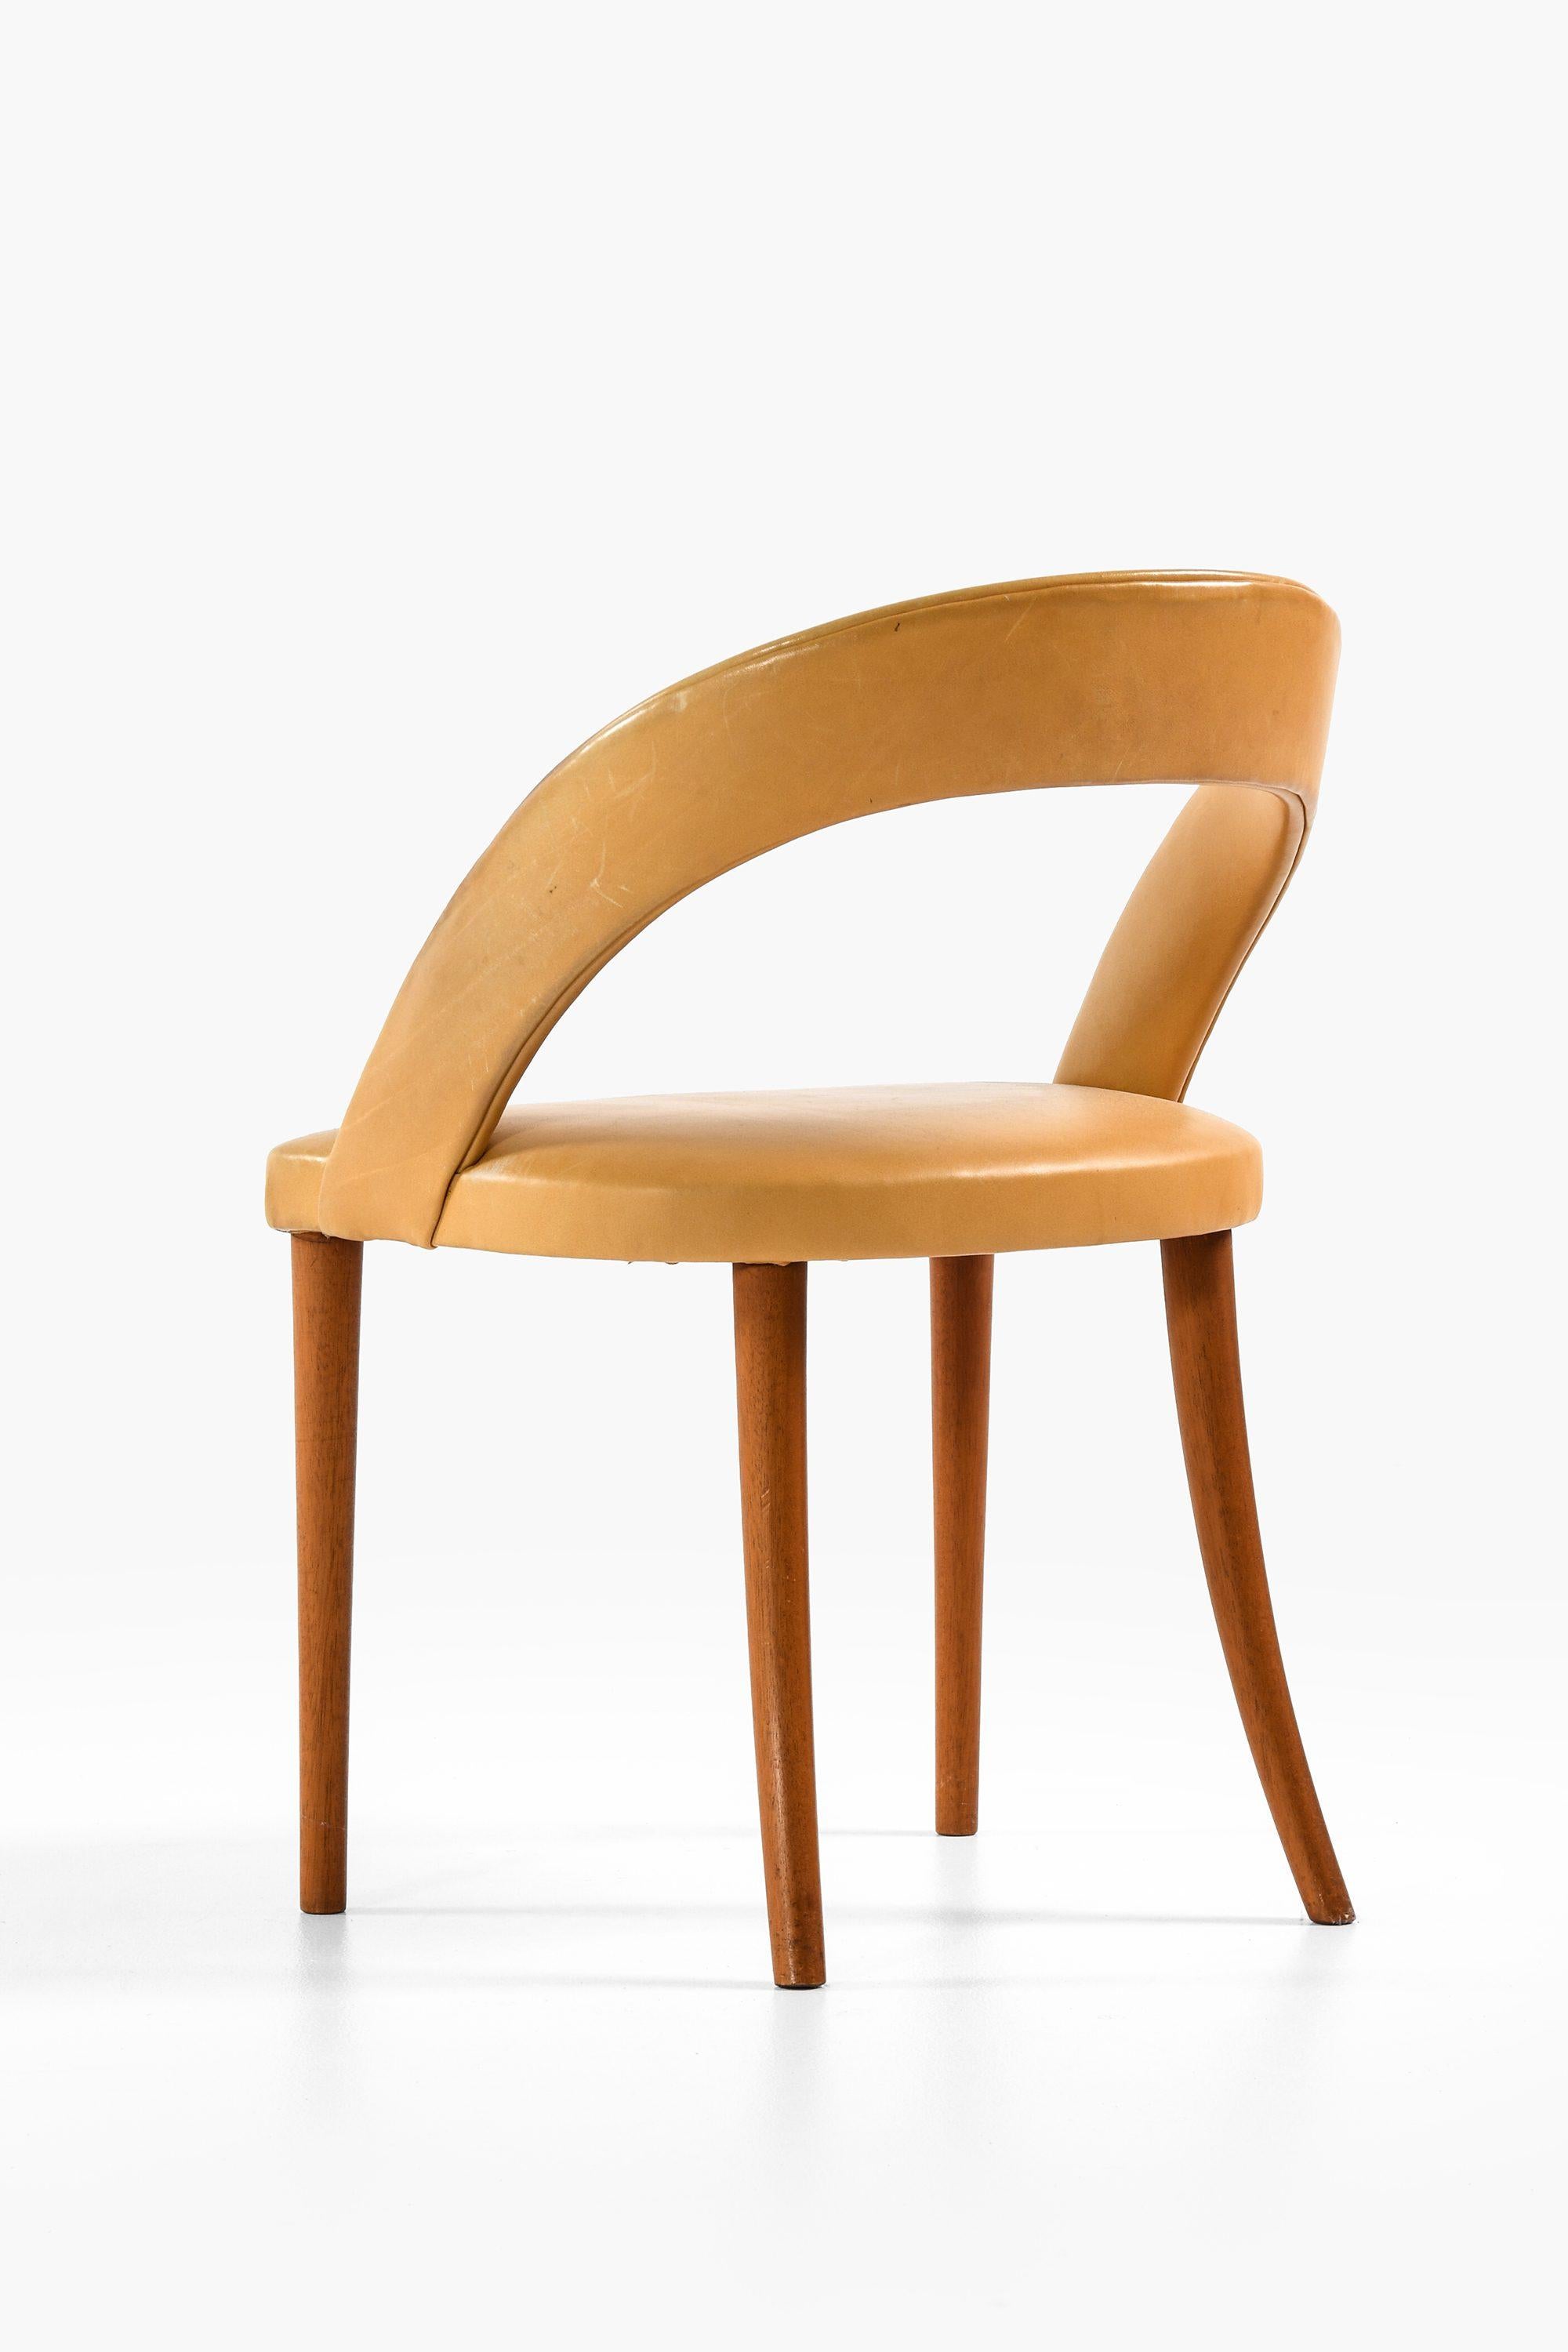 Danish Side Chair in Mahogany and Leather by Frode Holm, 1950s For Sale